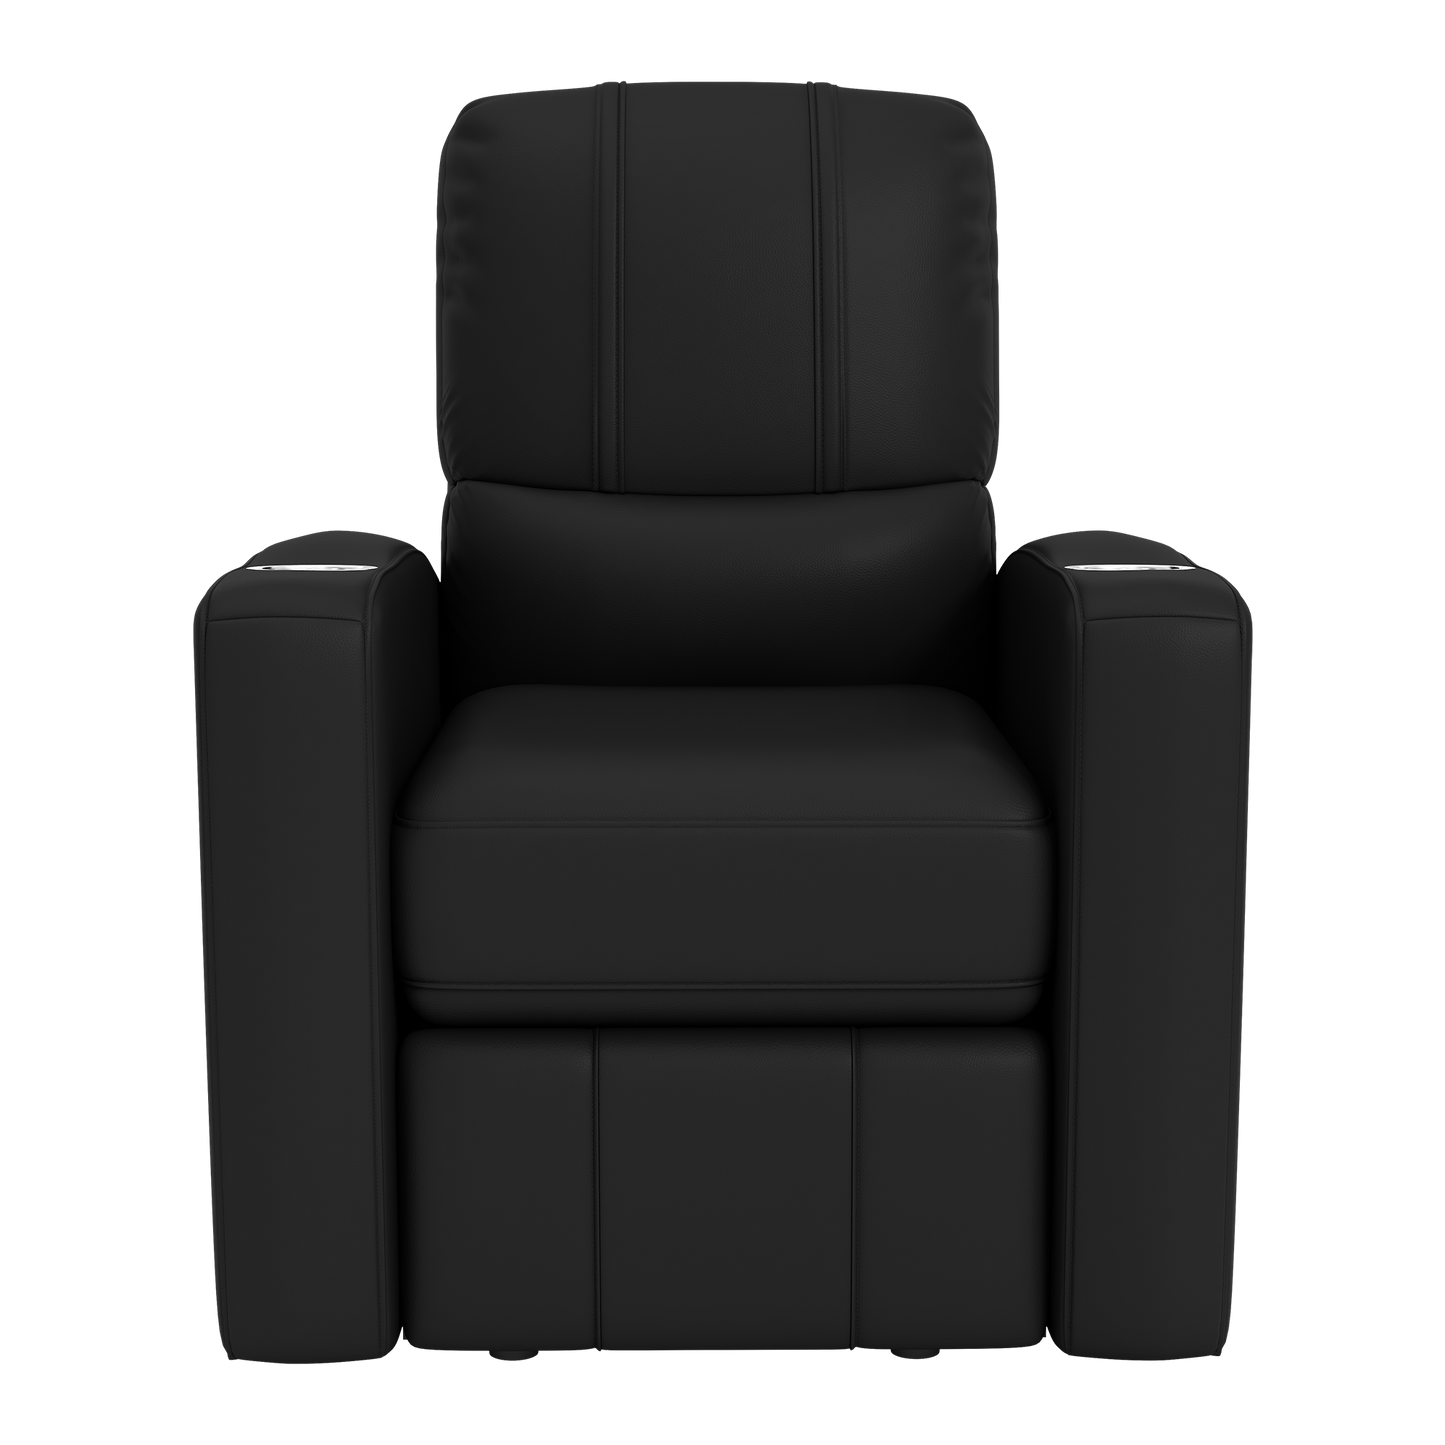 Stealth Recliner with Kansas City Royals Cooperstown